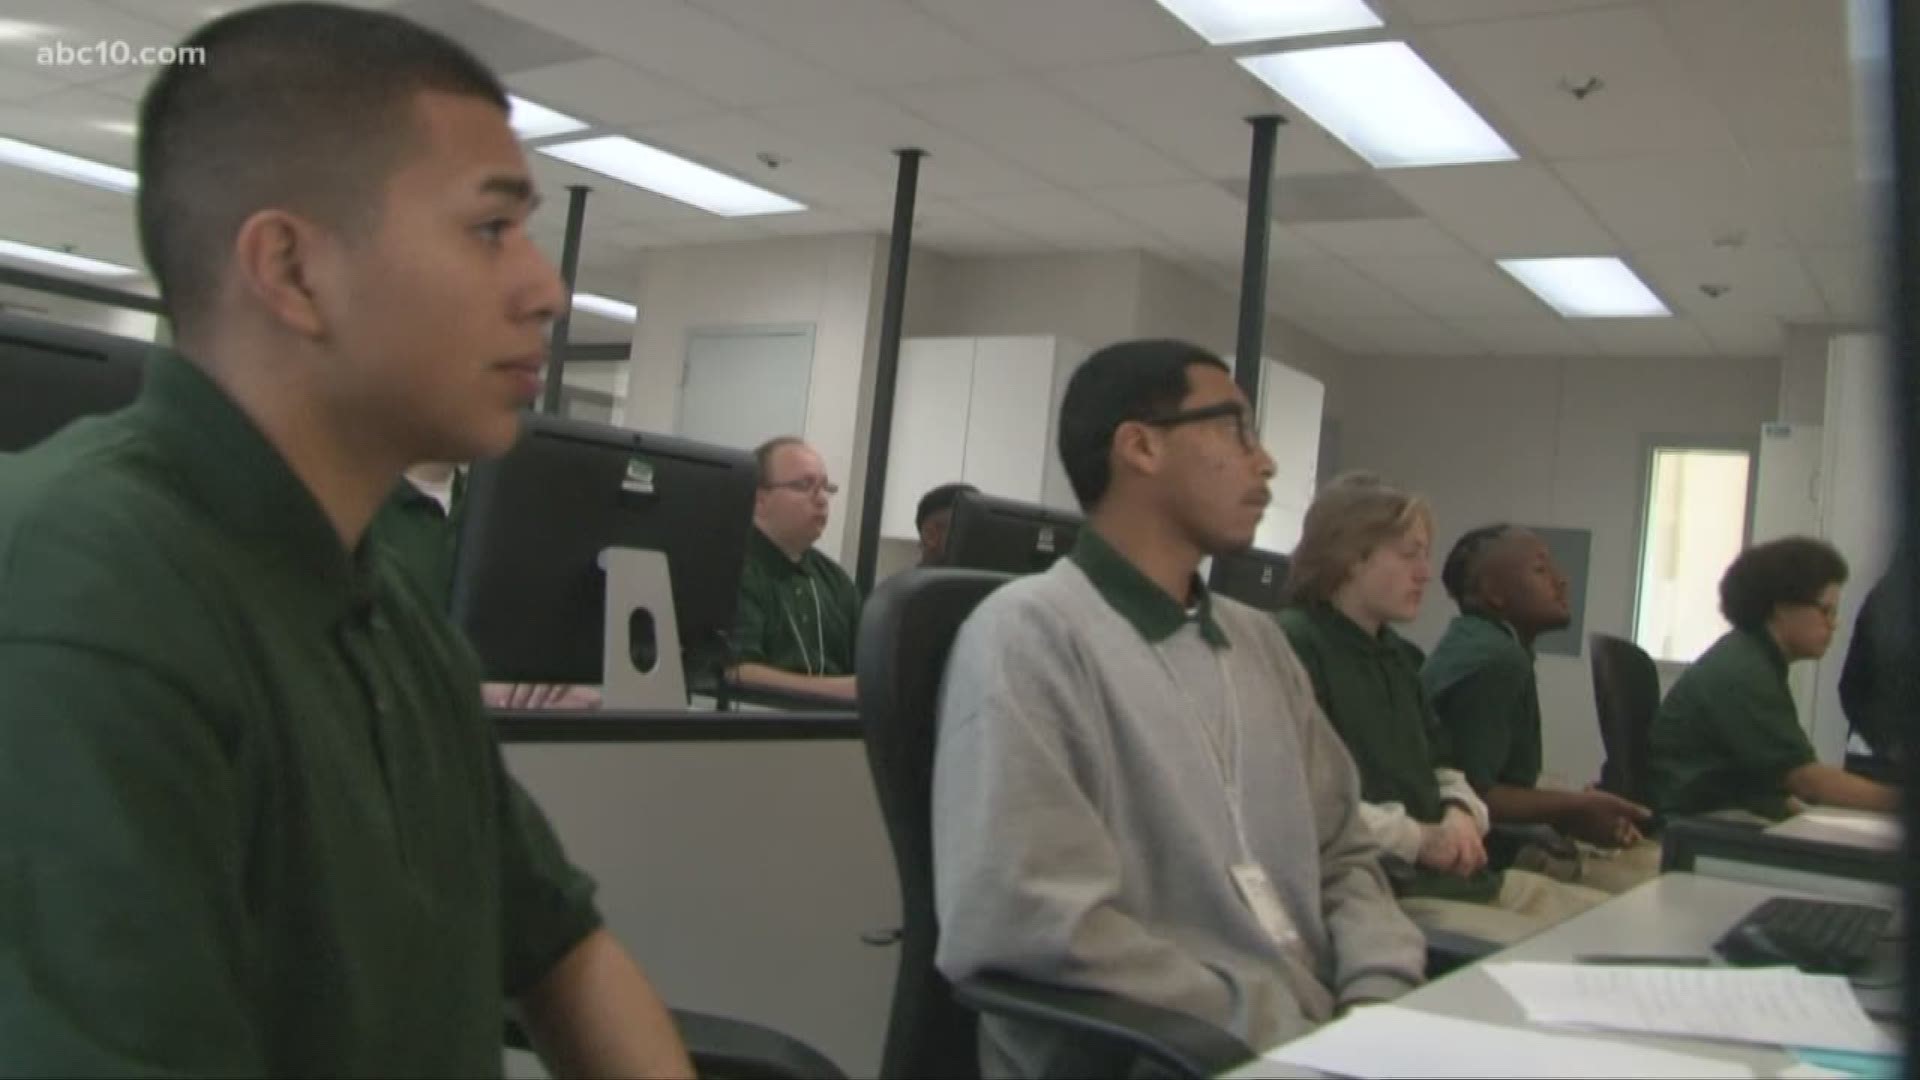 Code 7370 is an 18-month, technology-based training program supported by the San Francisco-based non-profit The Last Mile. It teaches offenders basic computer skills, coding instruction to help create websites and apps.